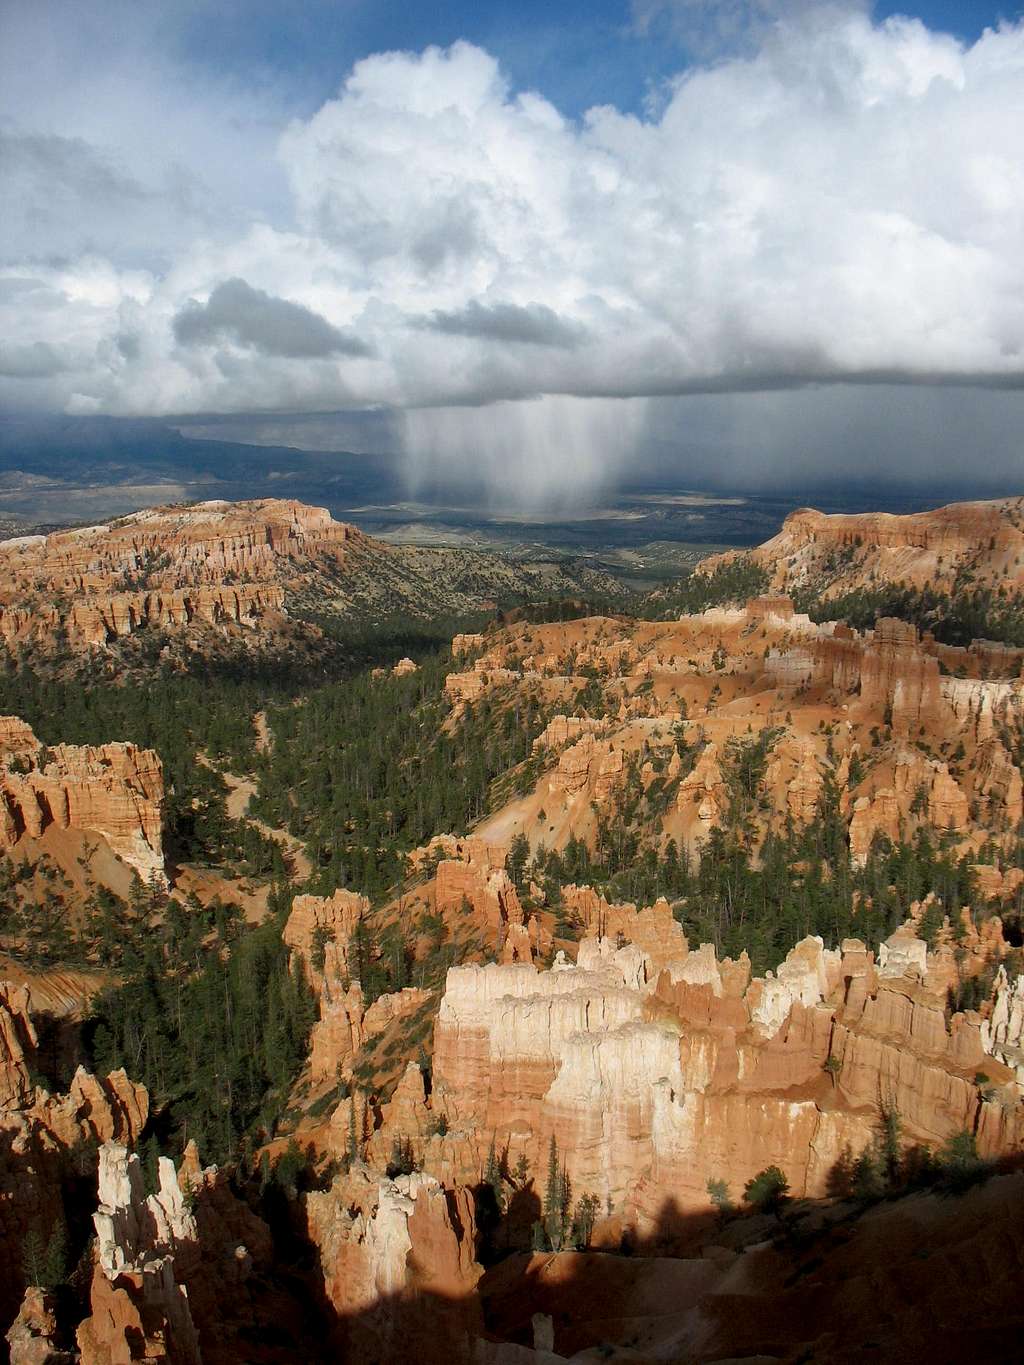 Stormclouds over Bryce